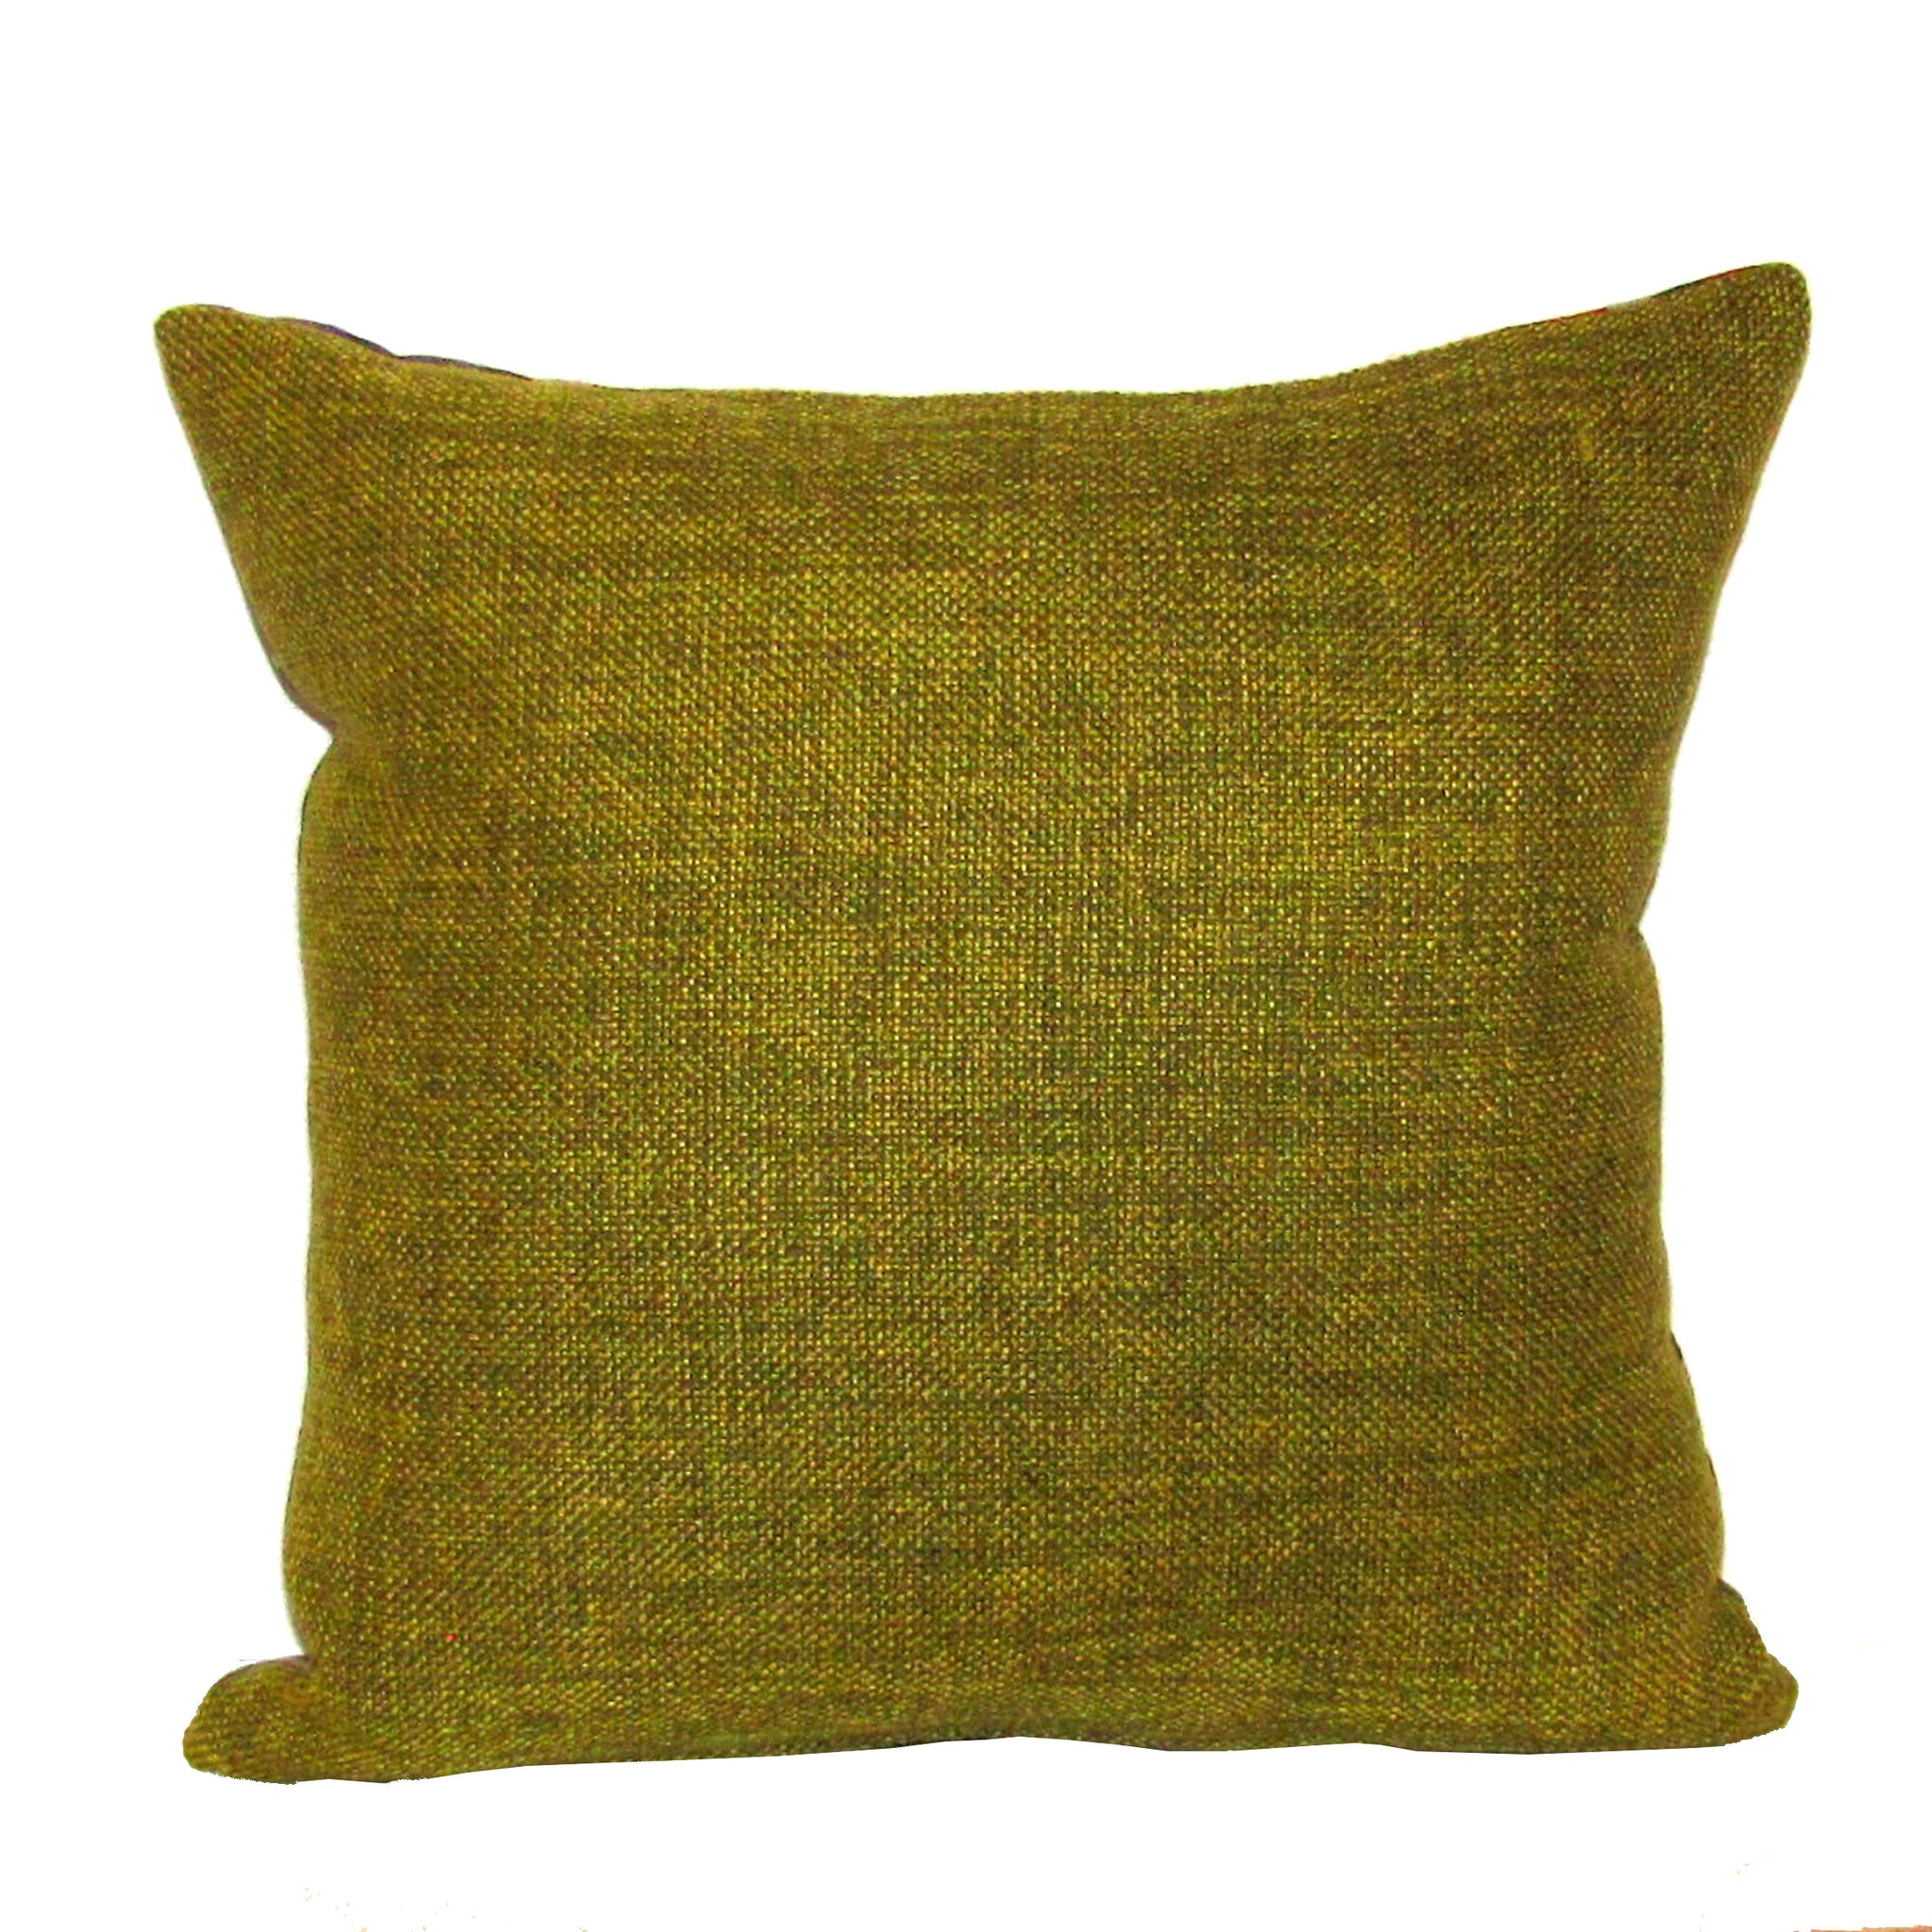 Made to order Bristol Pickle linen blend cushion cover